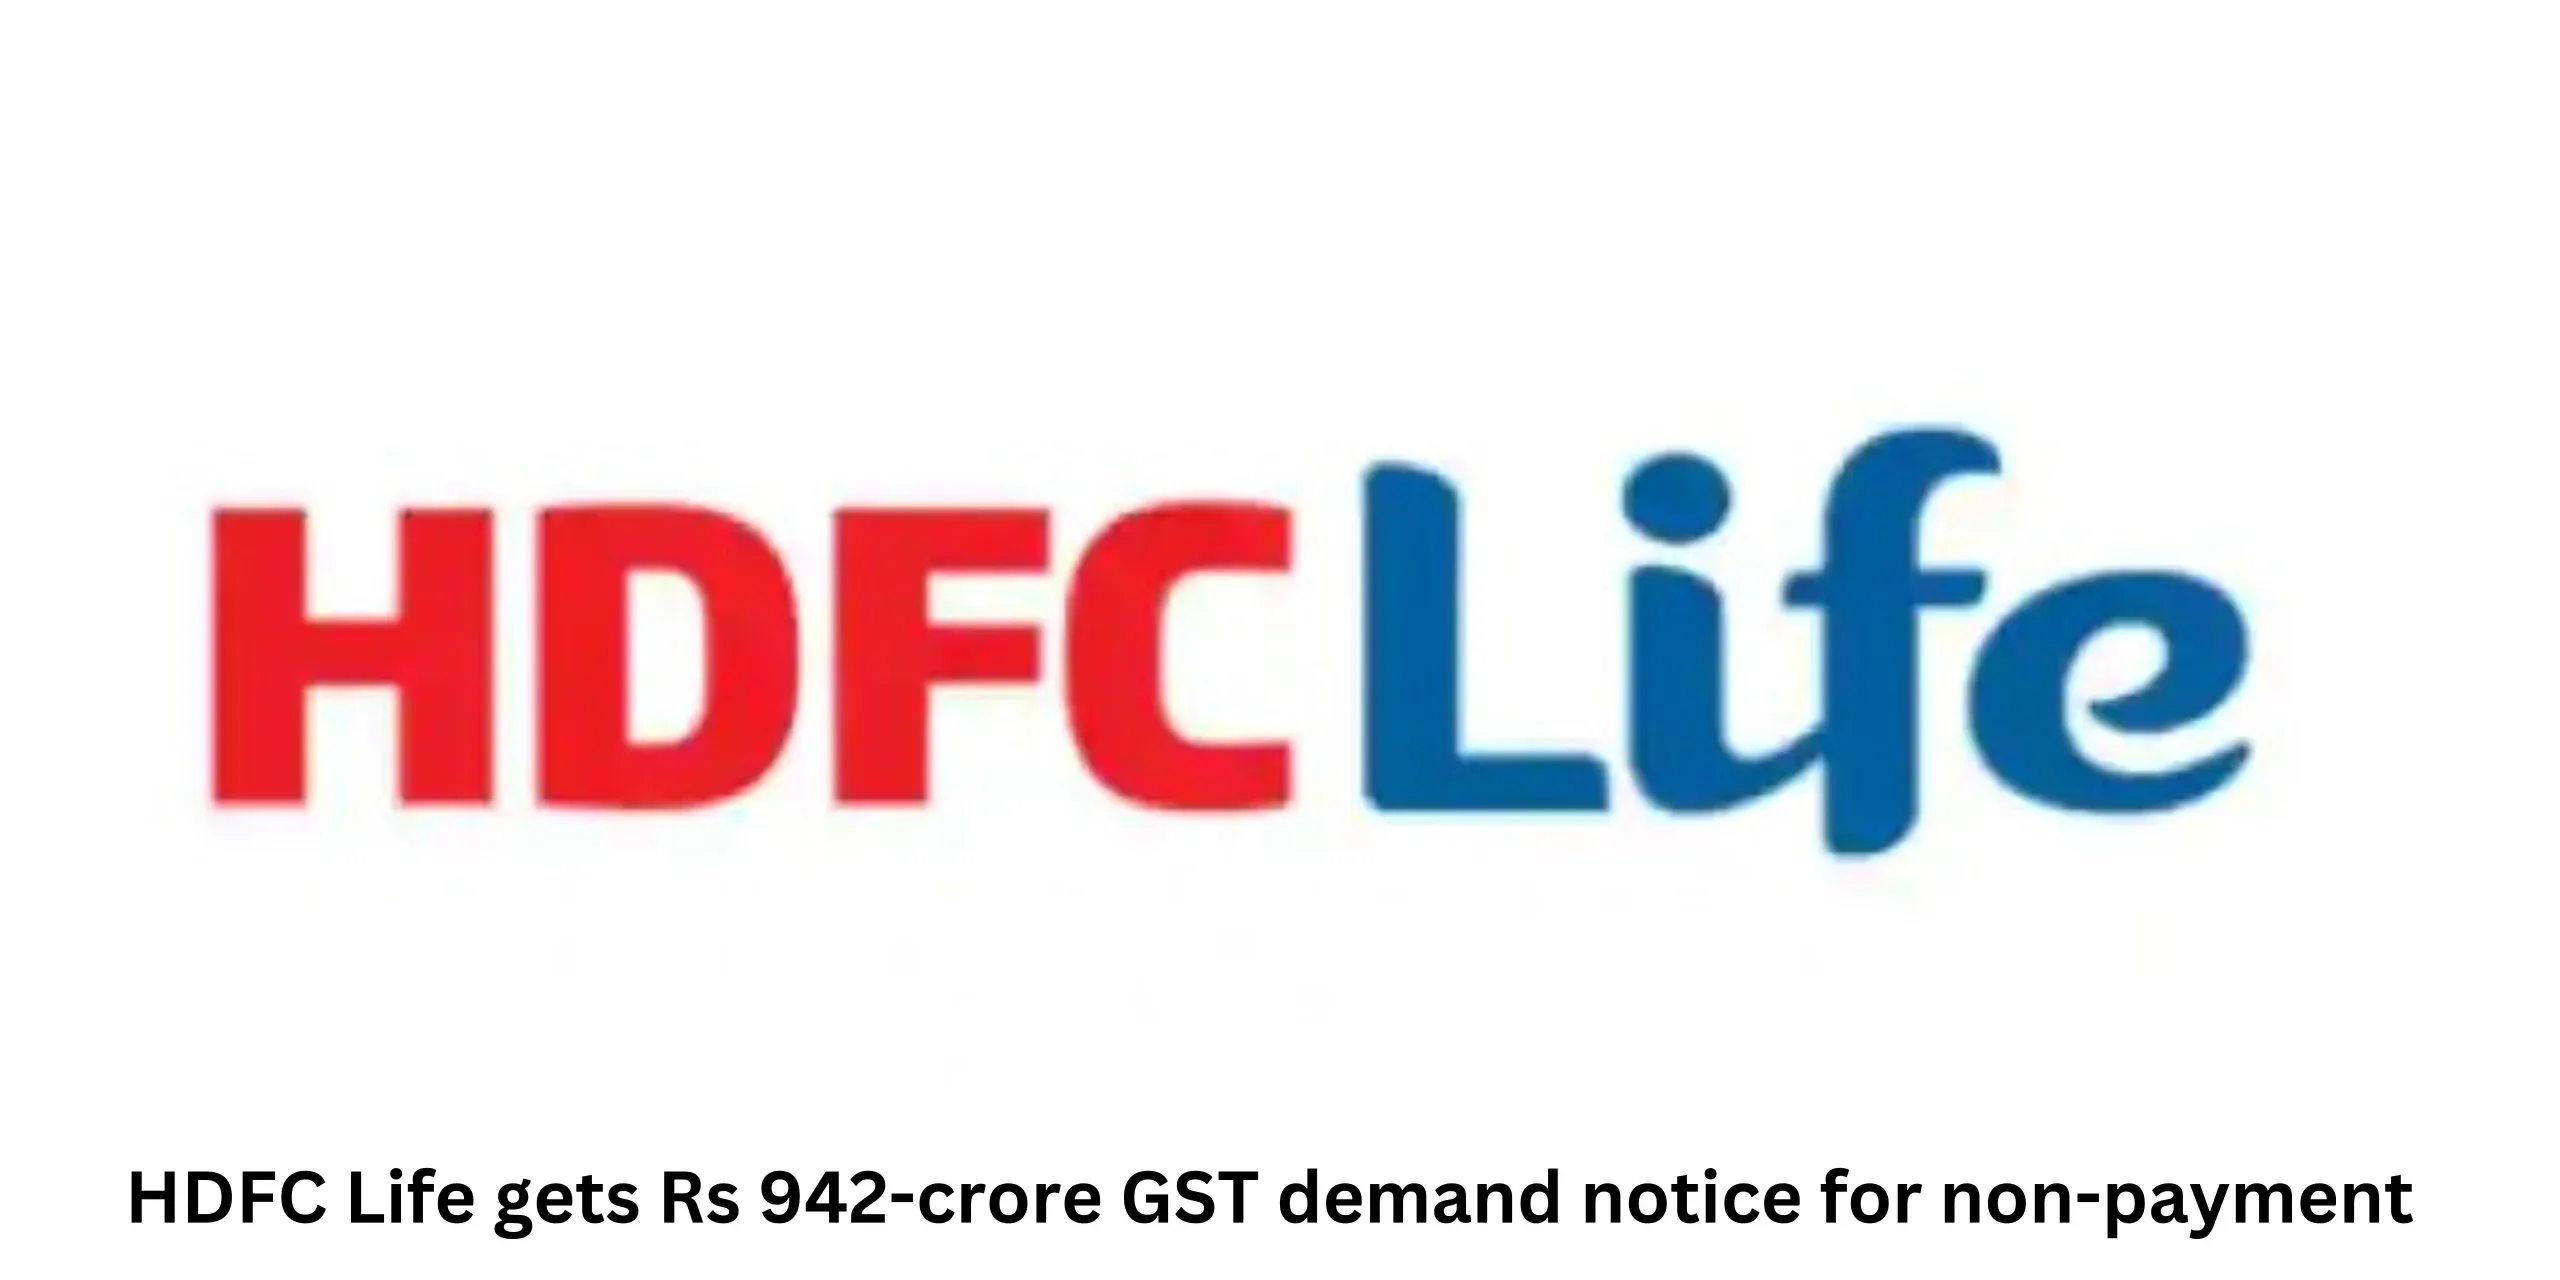 HDFC Life gets Rs 942-crore GST demand notice for non-payment